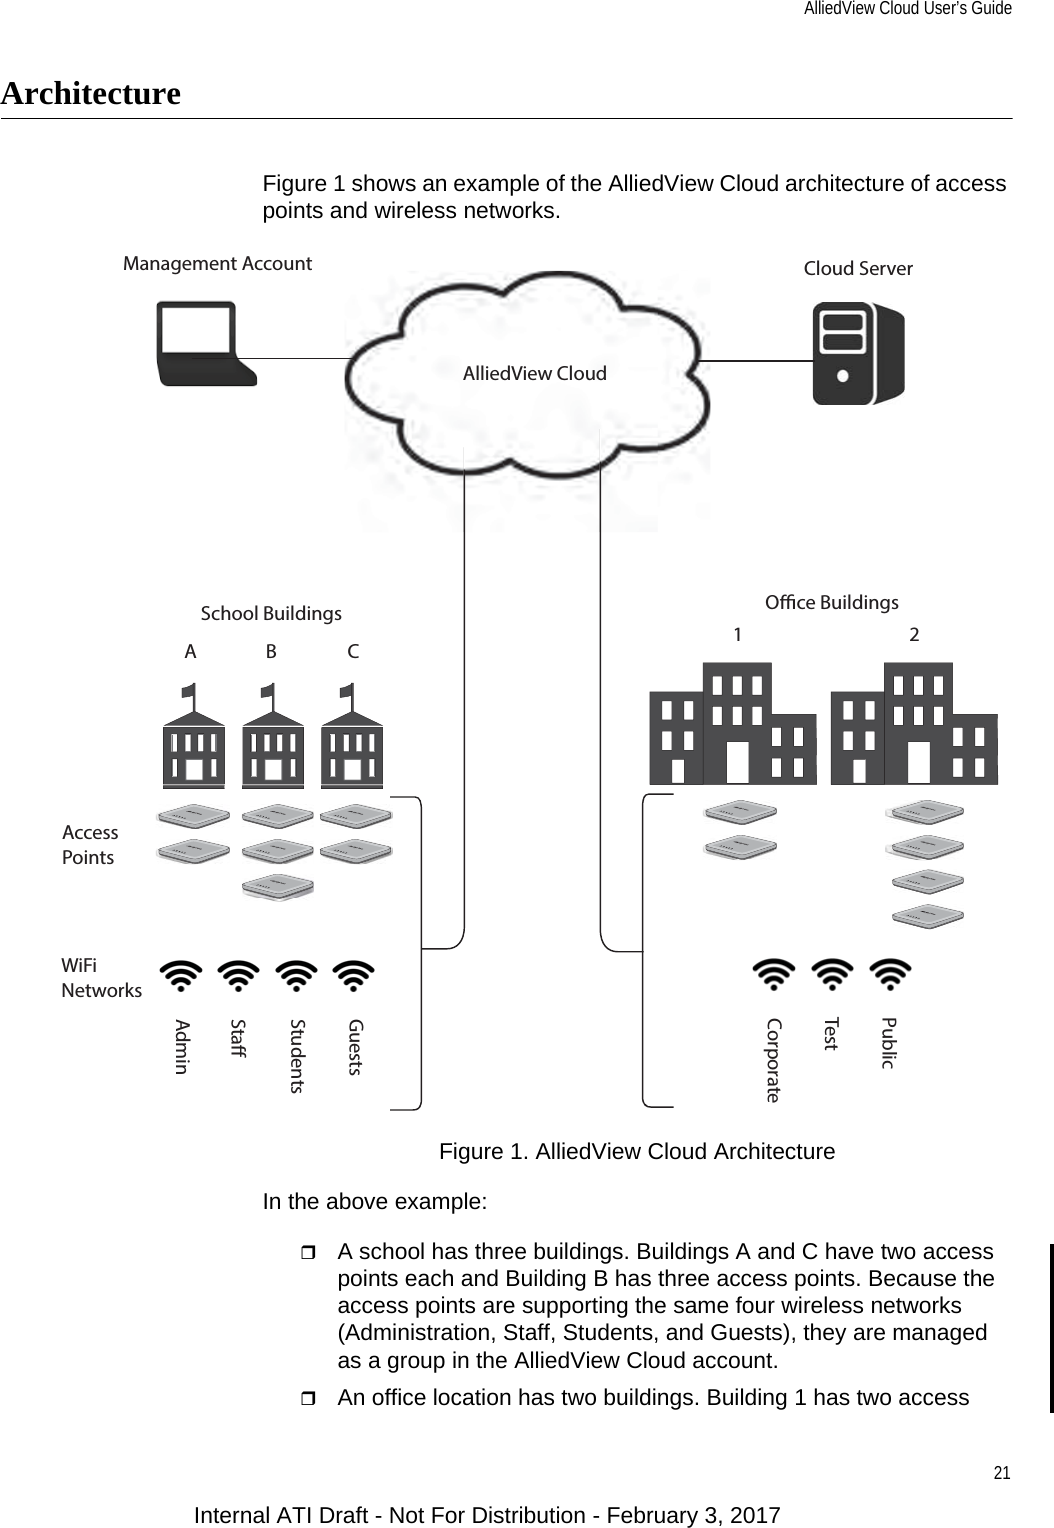 AlliedView Cloud User’s Guide21ArchitectureFigure 1 shows an example of the AlliedView Cloud architecture of access points and wireless networks.Figure 1. AlliedView Cloud ArchitectureIn the above example:A school has three buildings. Buildings A and C have two access points each and Building B has three access points. Because the access points are supporting the same four wireless networks (Administration, Staff, Students, and Guests), they are managed as a group in the AlliedView Cloud account.An office location has two buildings. Building 1 has two access AT-AP500AT-AP500AT-AP500AT-AP500AT-AP500AT-AP500AT-AP500AT-AP500AT-AP500AT-AP500AT-AP500AT-AP500AT-AP500AlliedView CloudManagement Account Cloud ServerAccessPointsWiFiNetworksABC 12School Buildings Oce BuildingsAdminStaStudentsGuestsCorporateTestPublicInternal ATI Draft - Not For Distribution - February 3, 2017